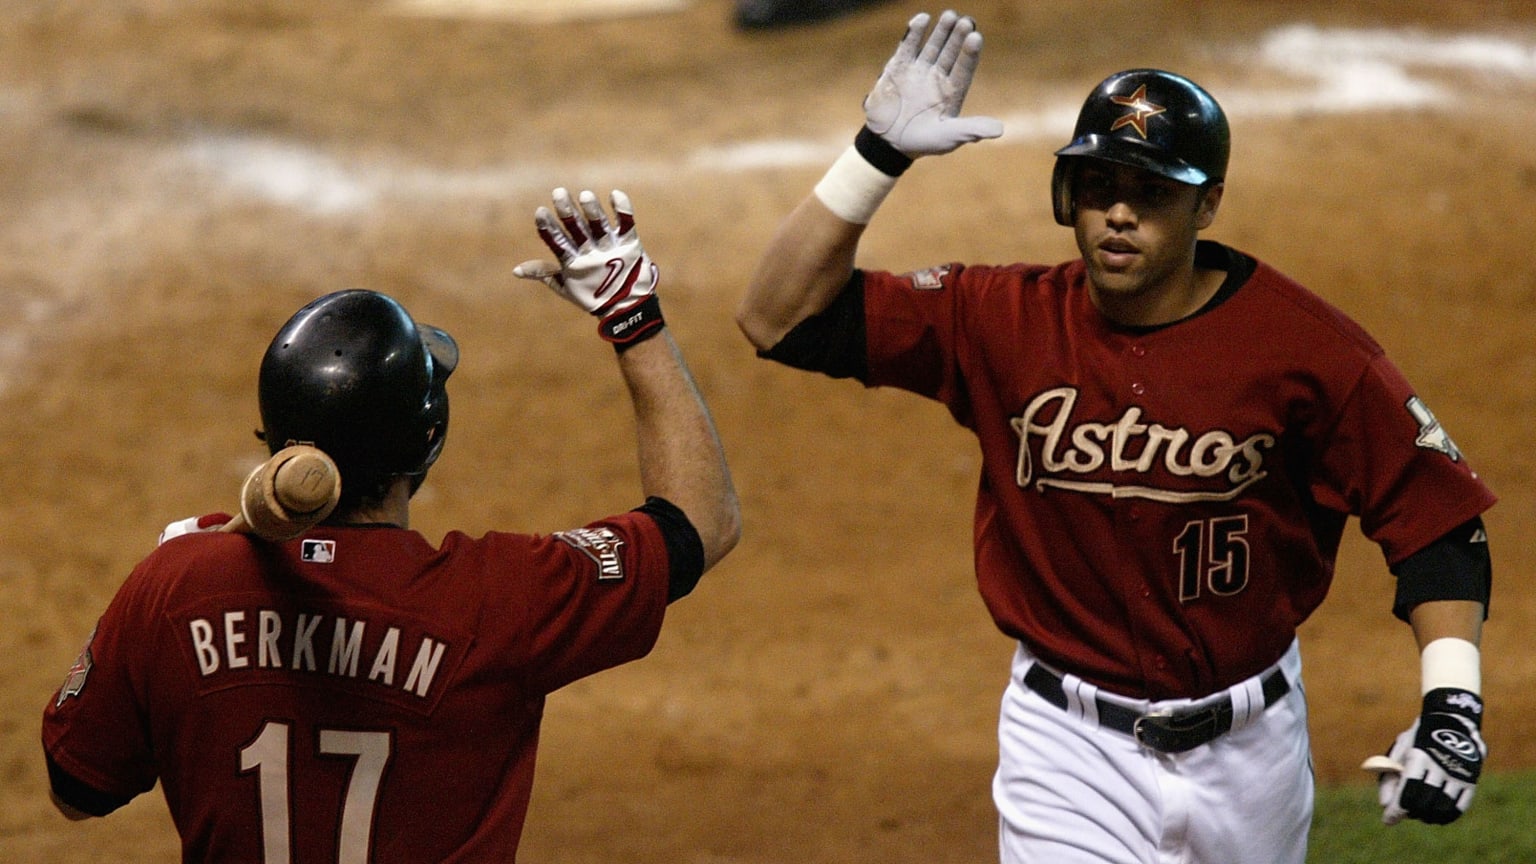 Lance Berkman and Carlos Beltran prepare to give each other a high-five